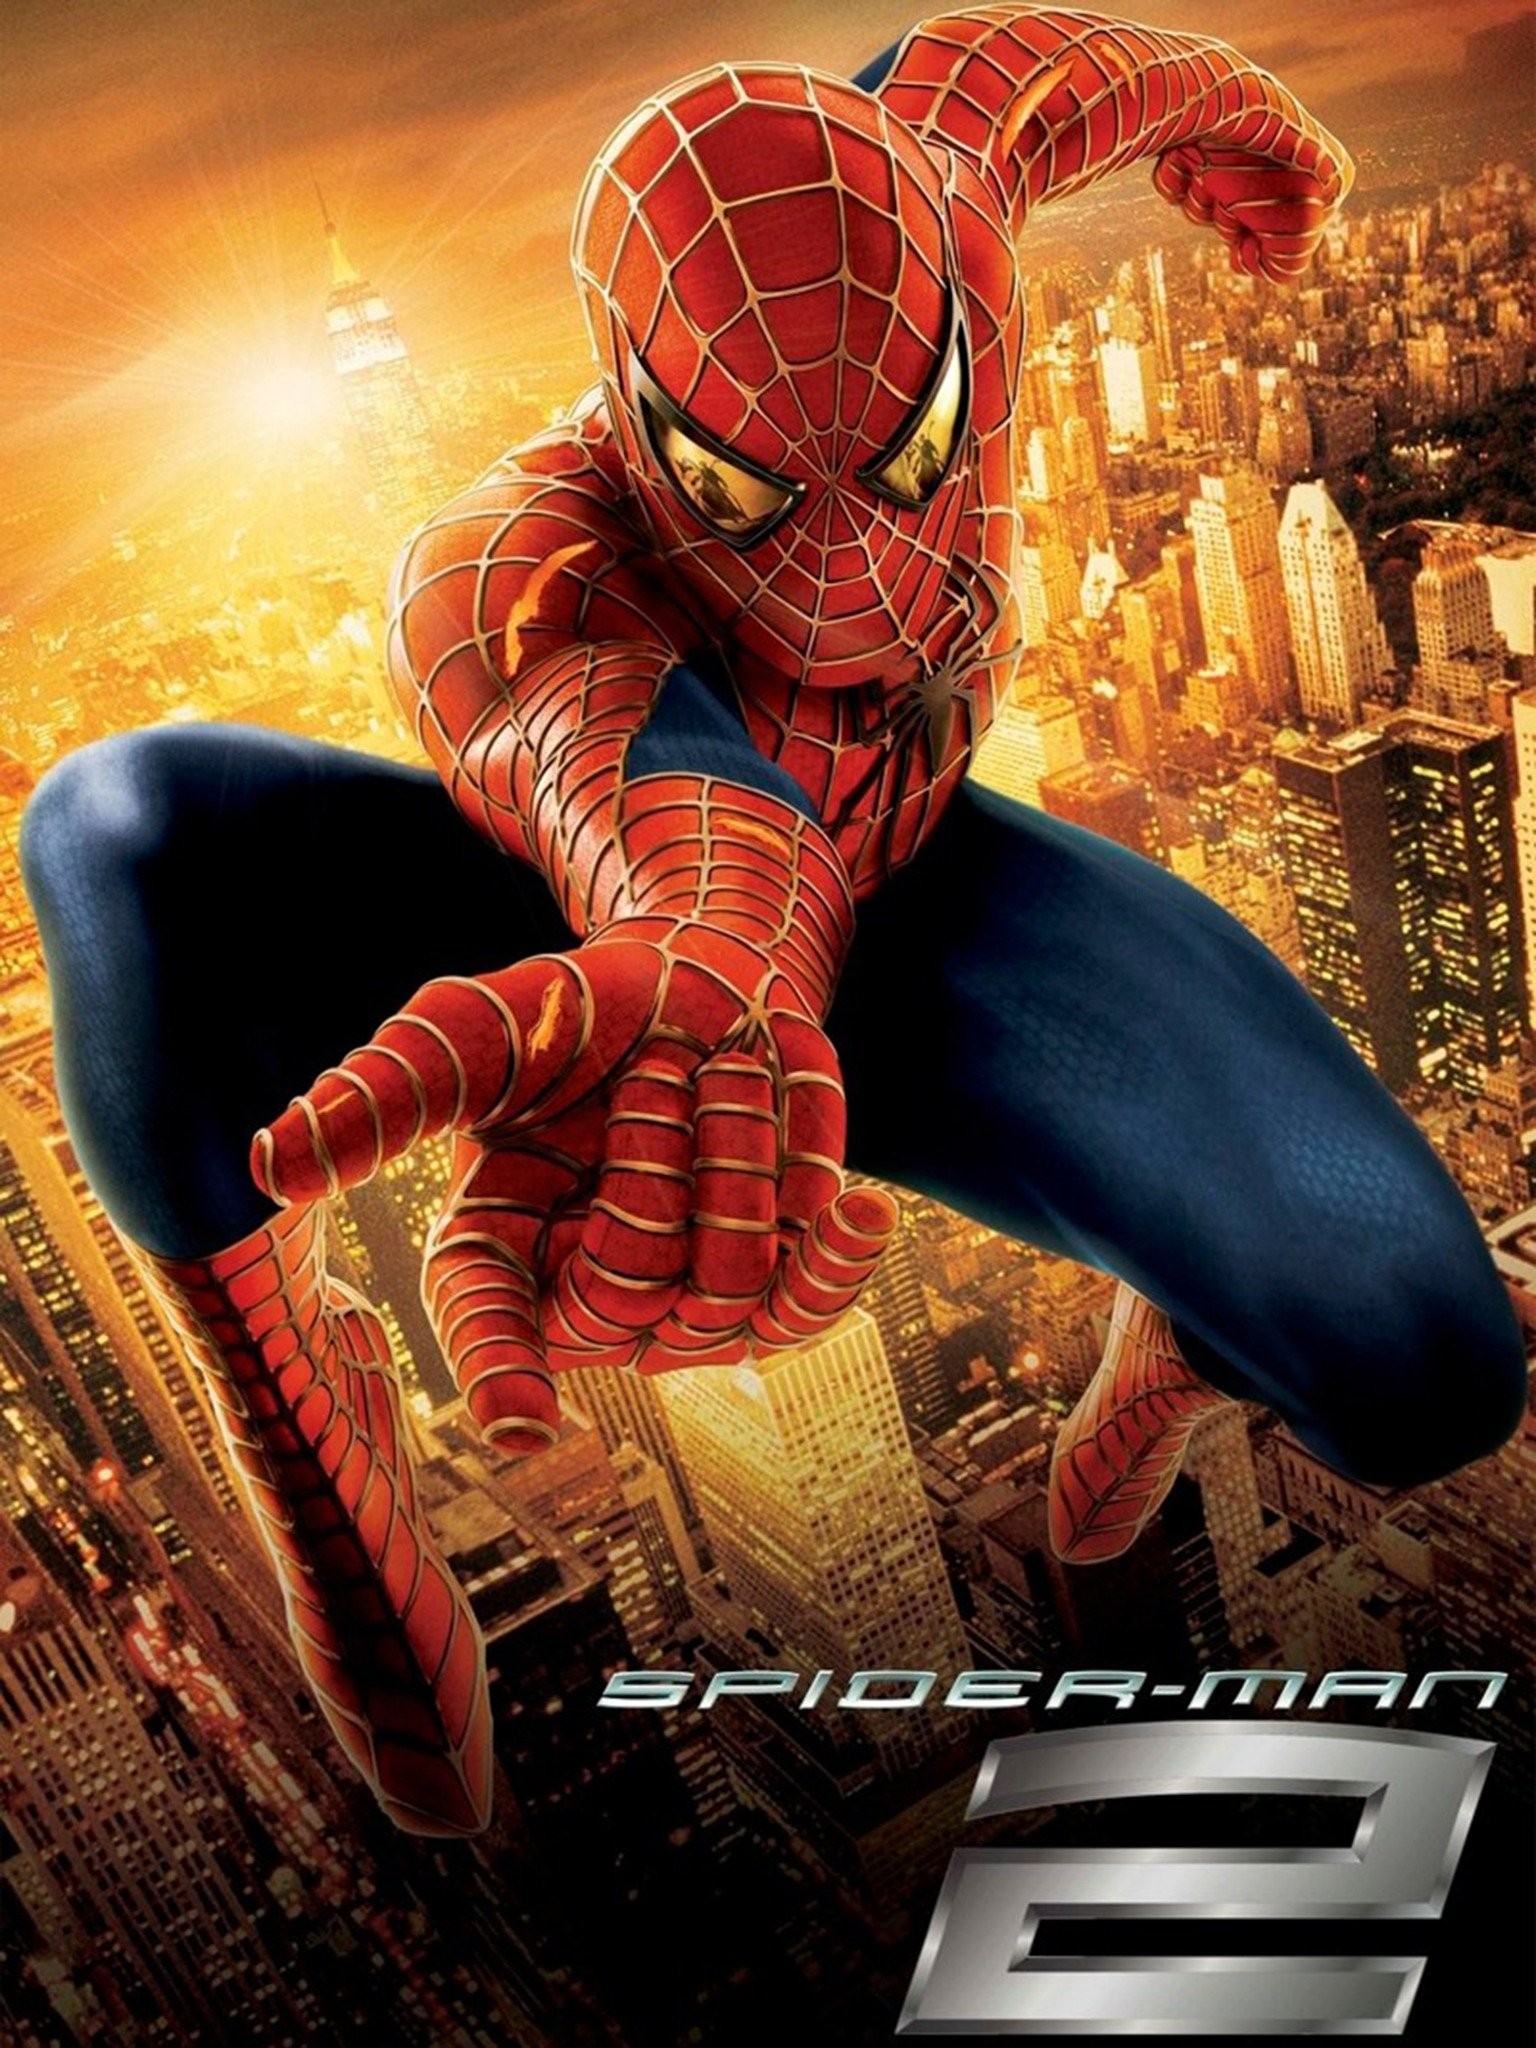 Spider-Man 2 Reviews Have Dropped And It's Looking Good